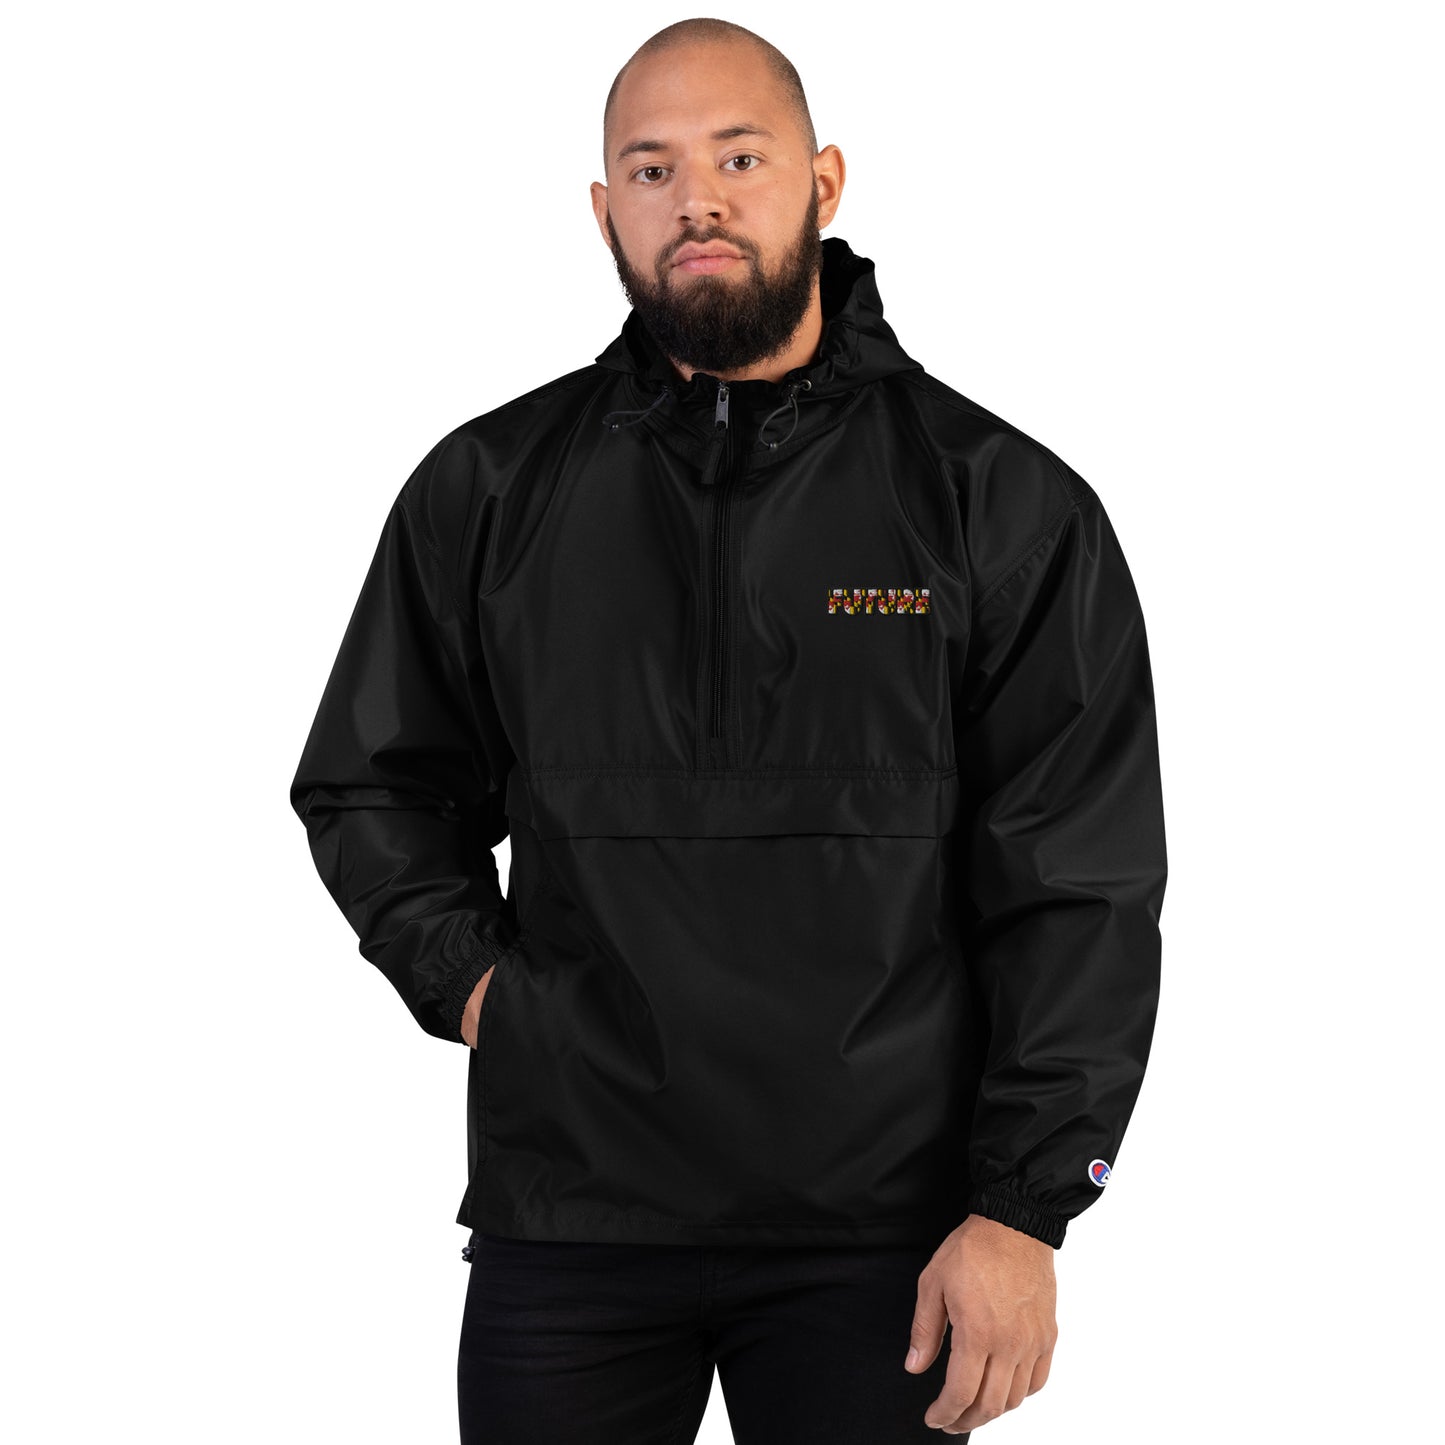 FUTURE Embroidered Champion Packable Jacket